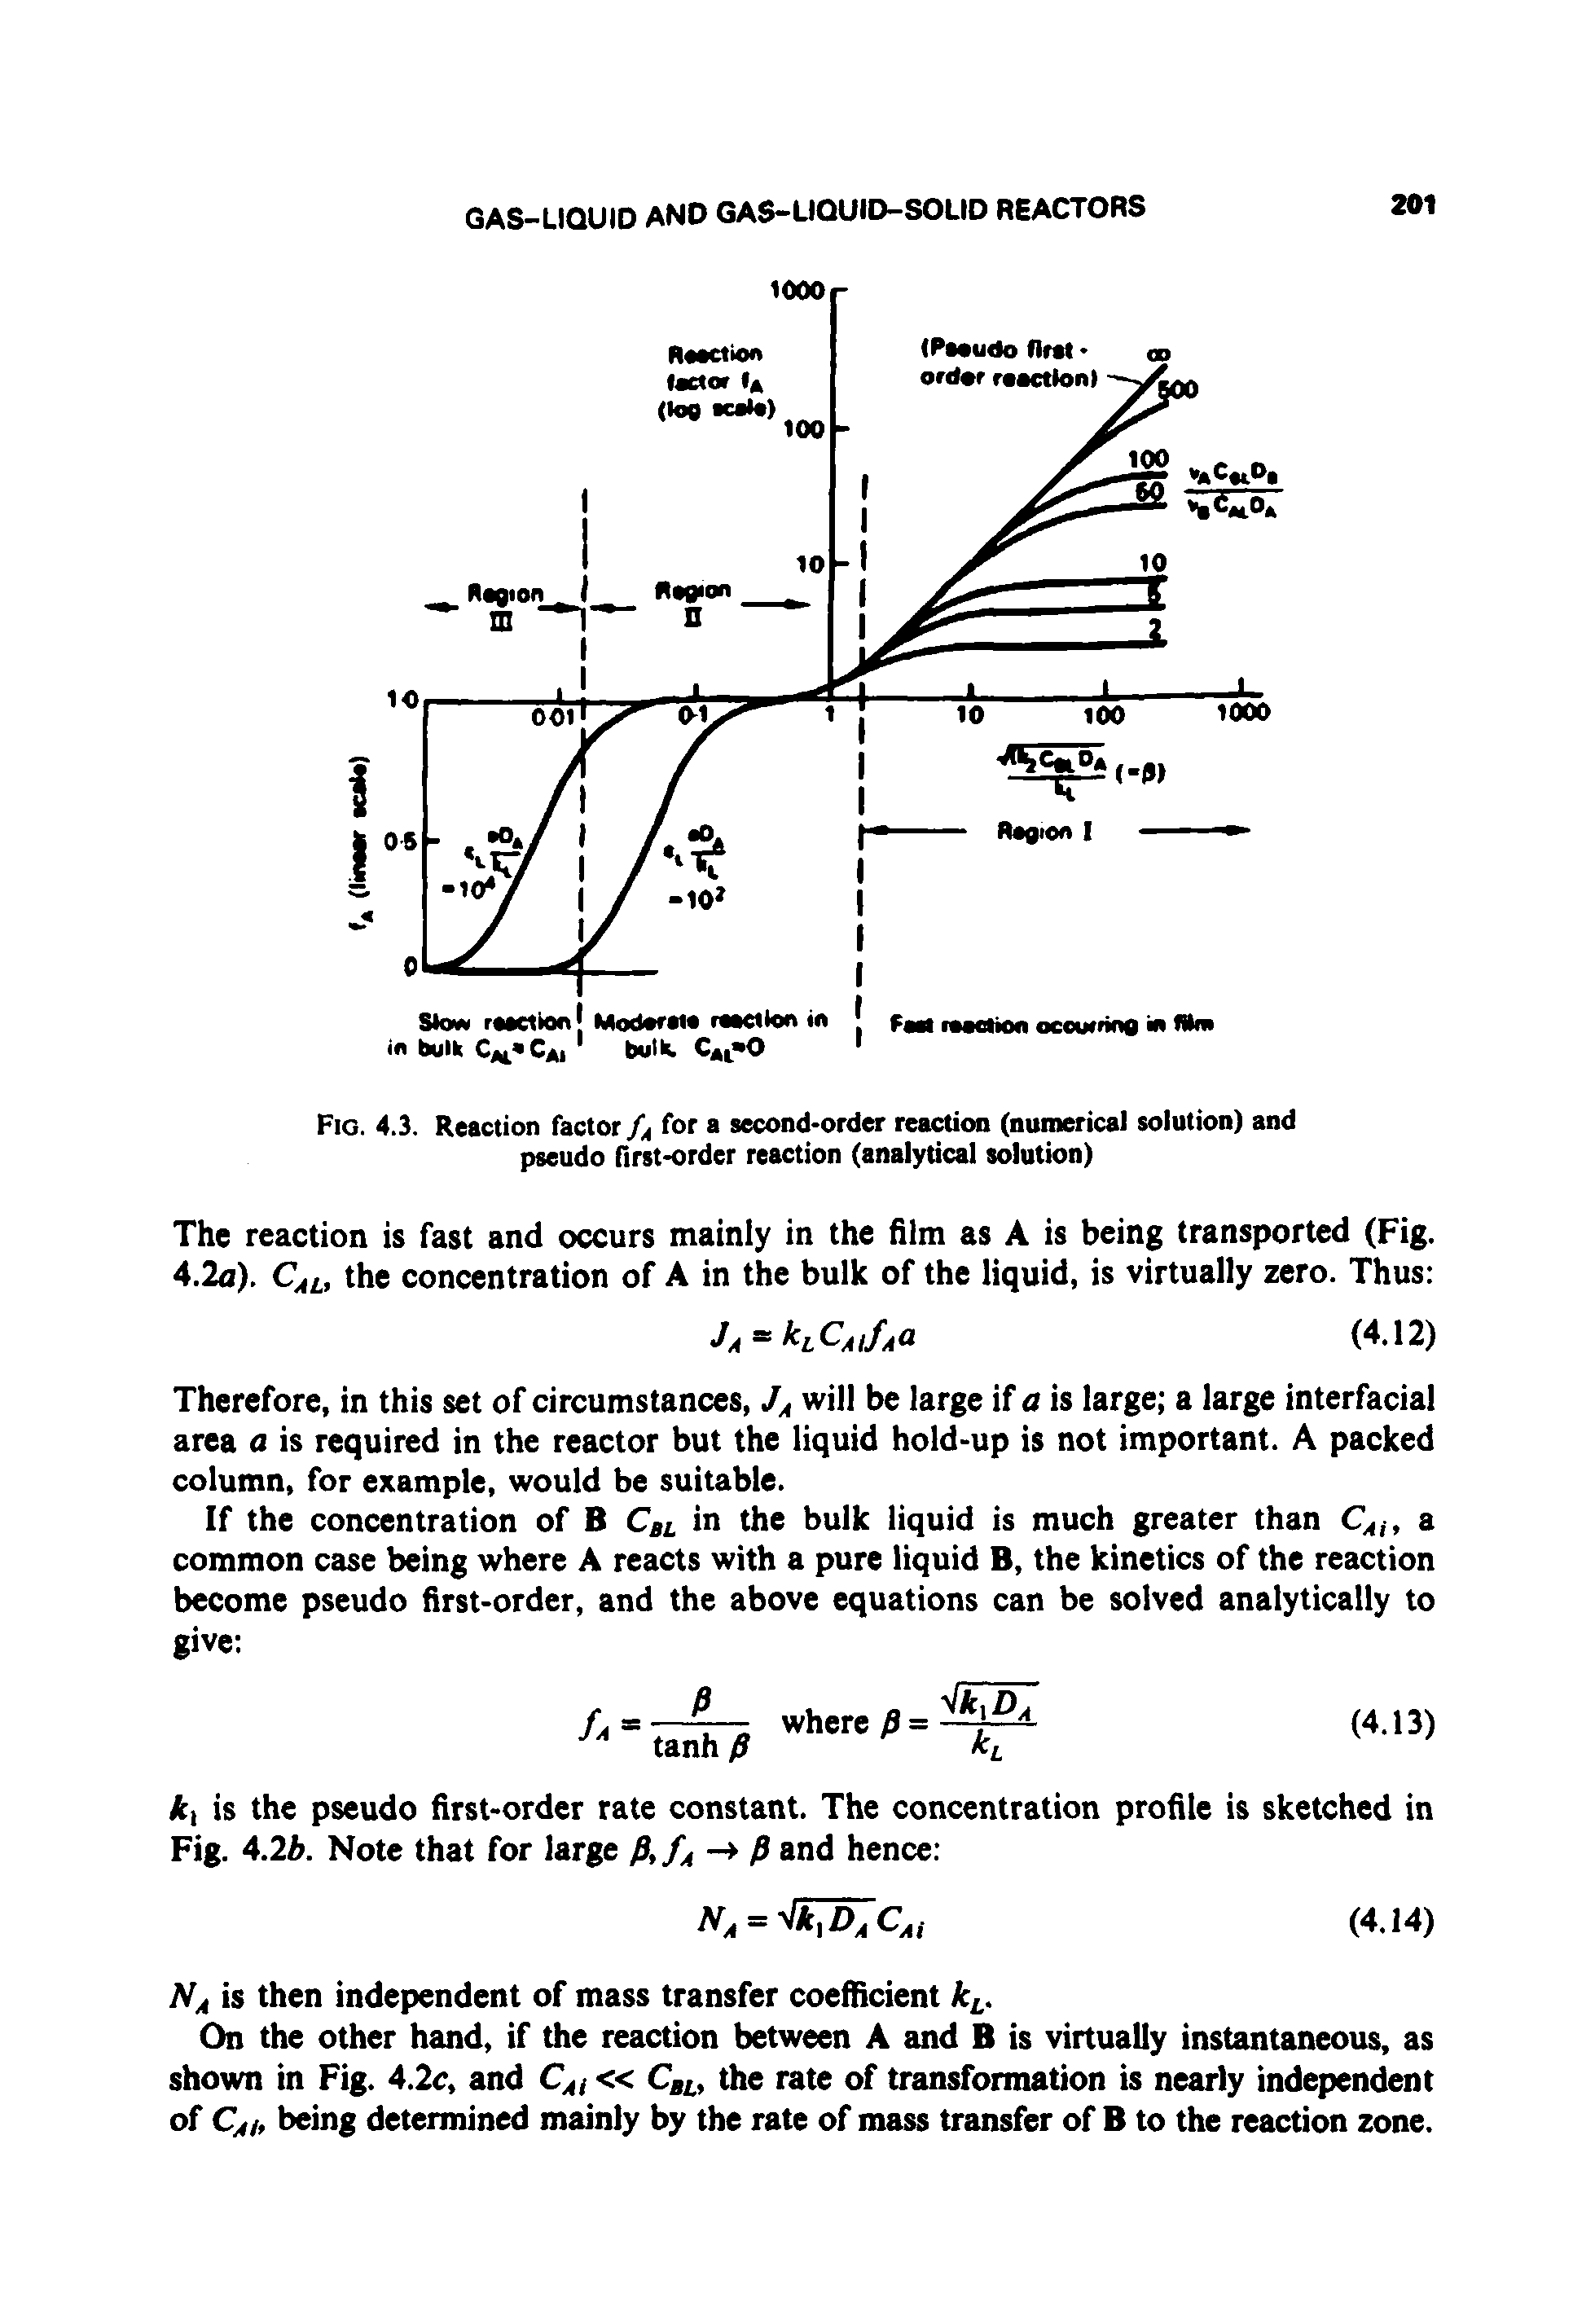 Fig. 4.3. Reaction factor/, for a second-order reaction (numerical solution) and pseudo first-order reaction (analytical solution)...